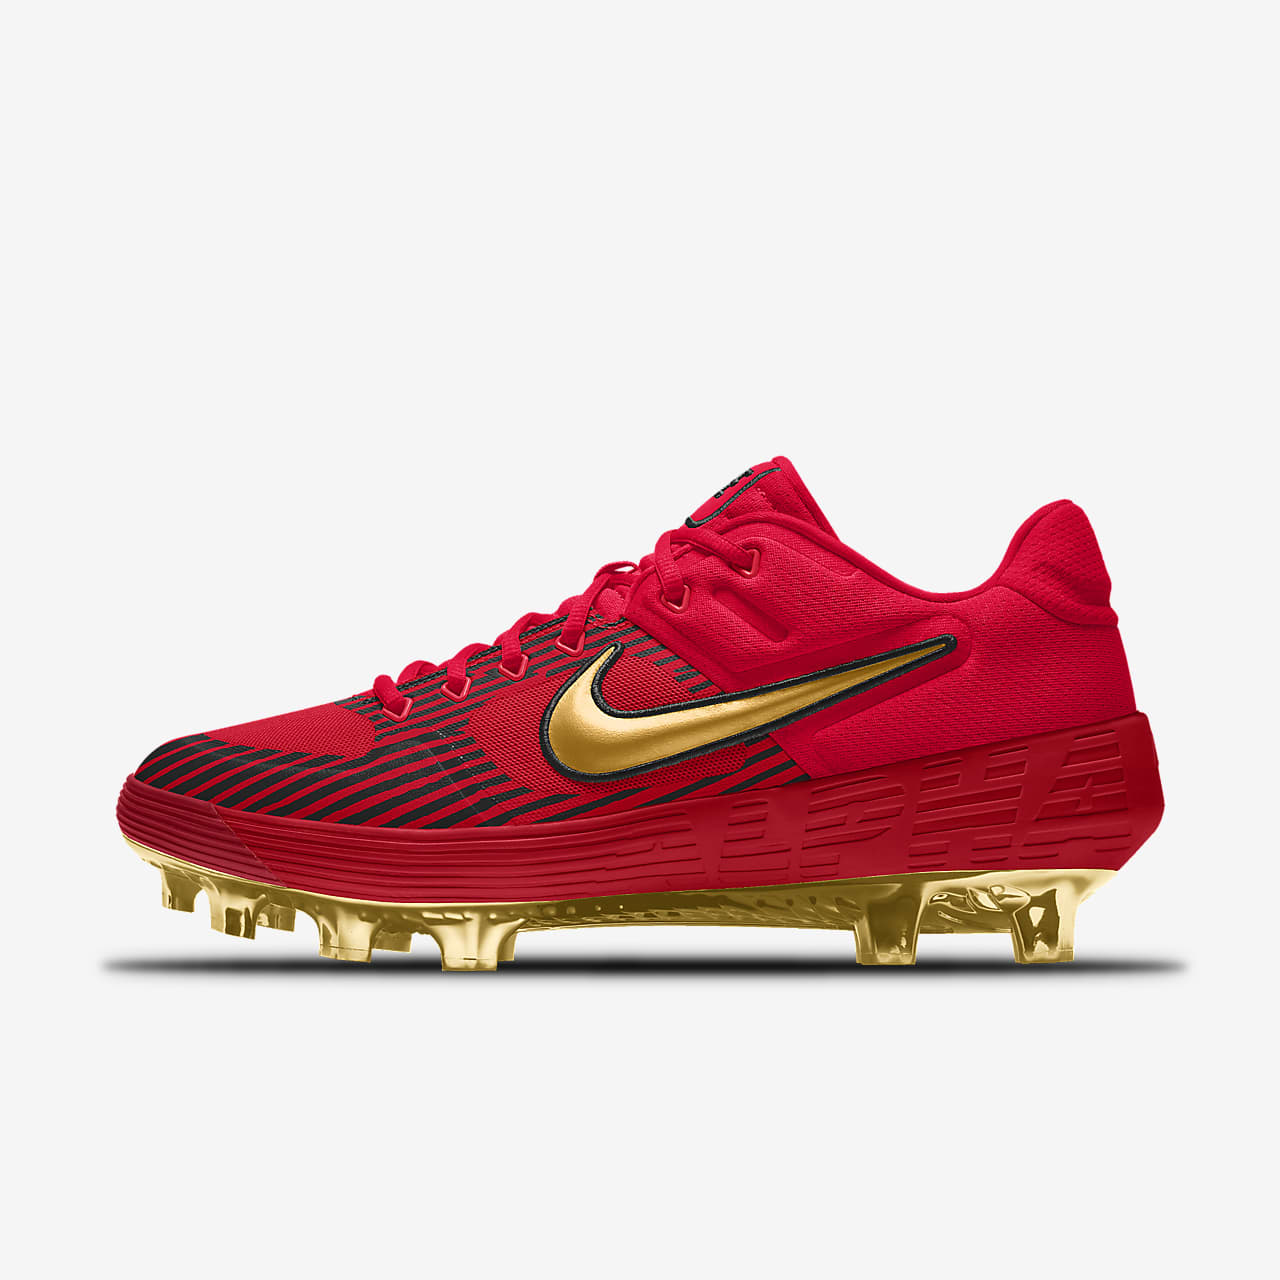 nike id customize cleats Shop Clothing 